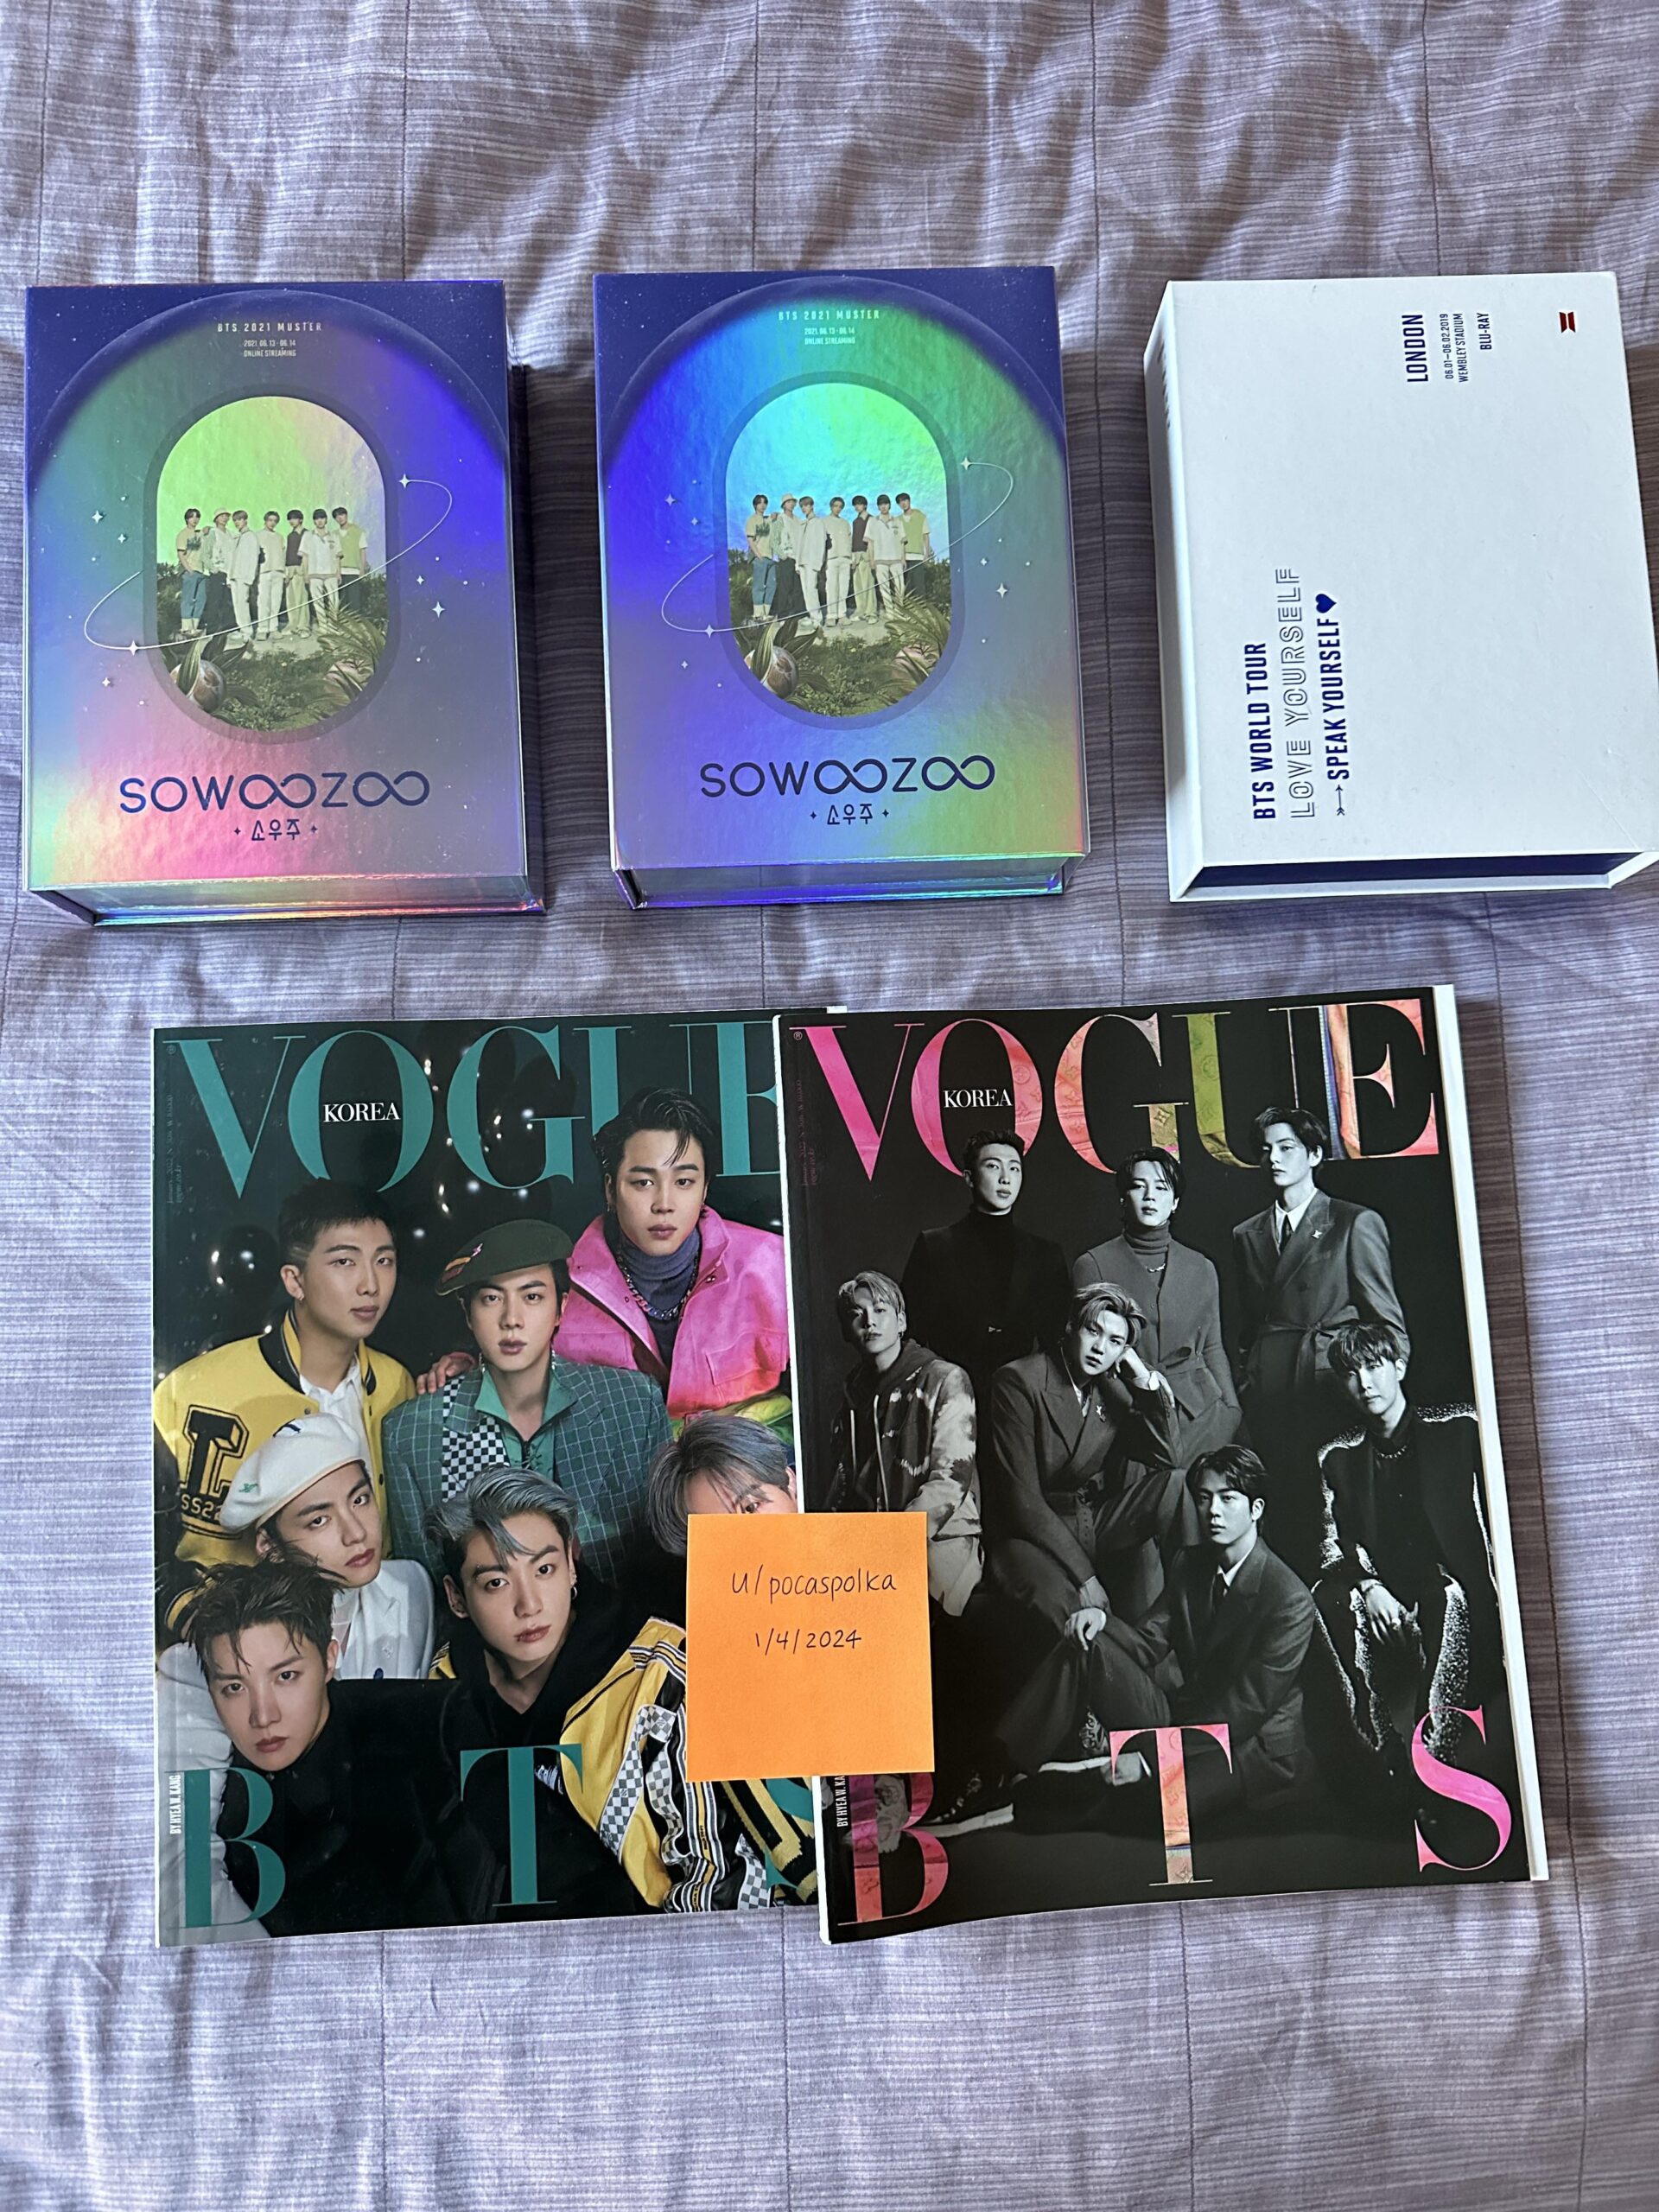 [WTS] [US only] Sowoozoo DVDs, LYSY London Blu-Ray, OT7 Vogue